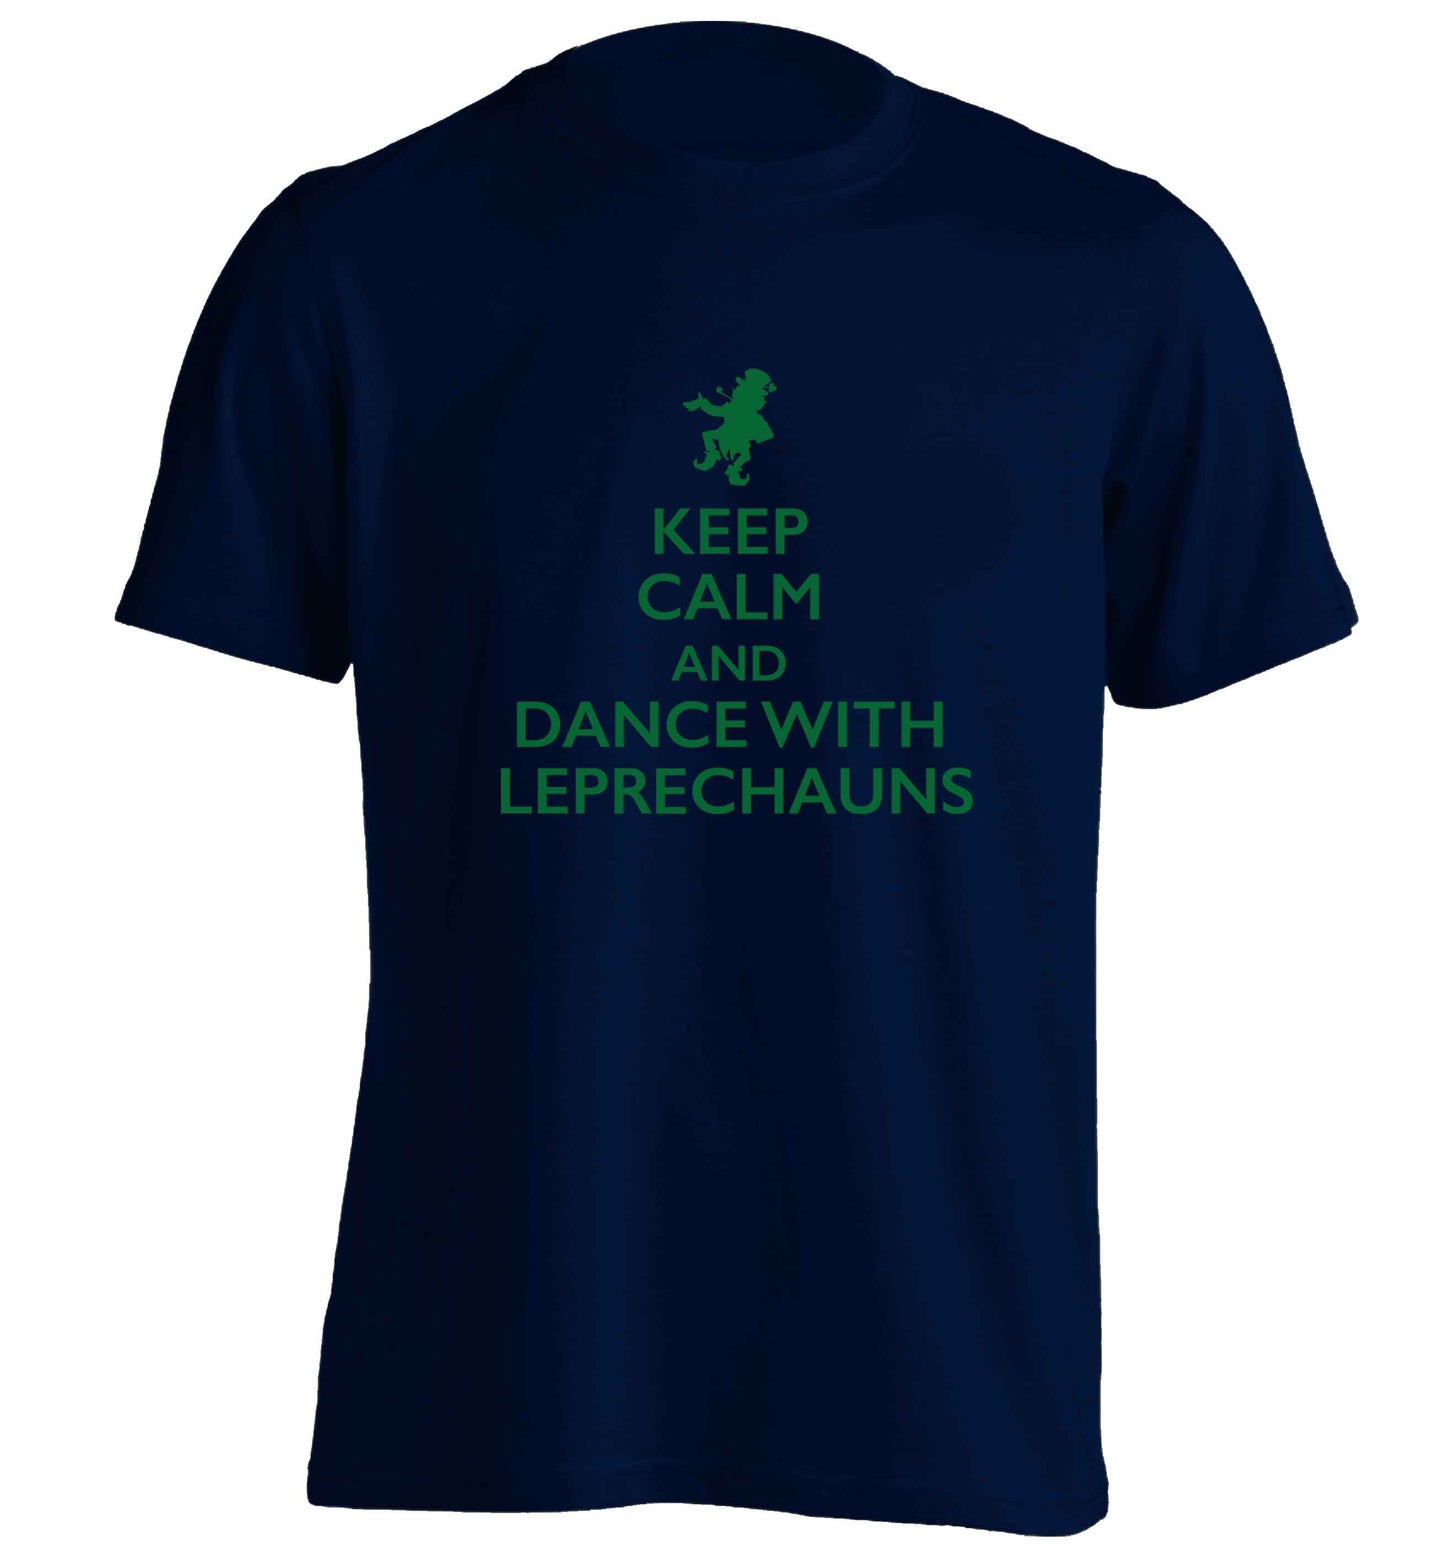 Keep calm and dance with leprechauns adults unisex navy Tshirt 2XL